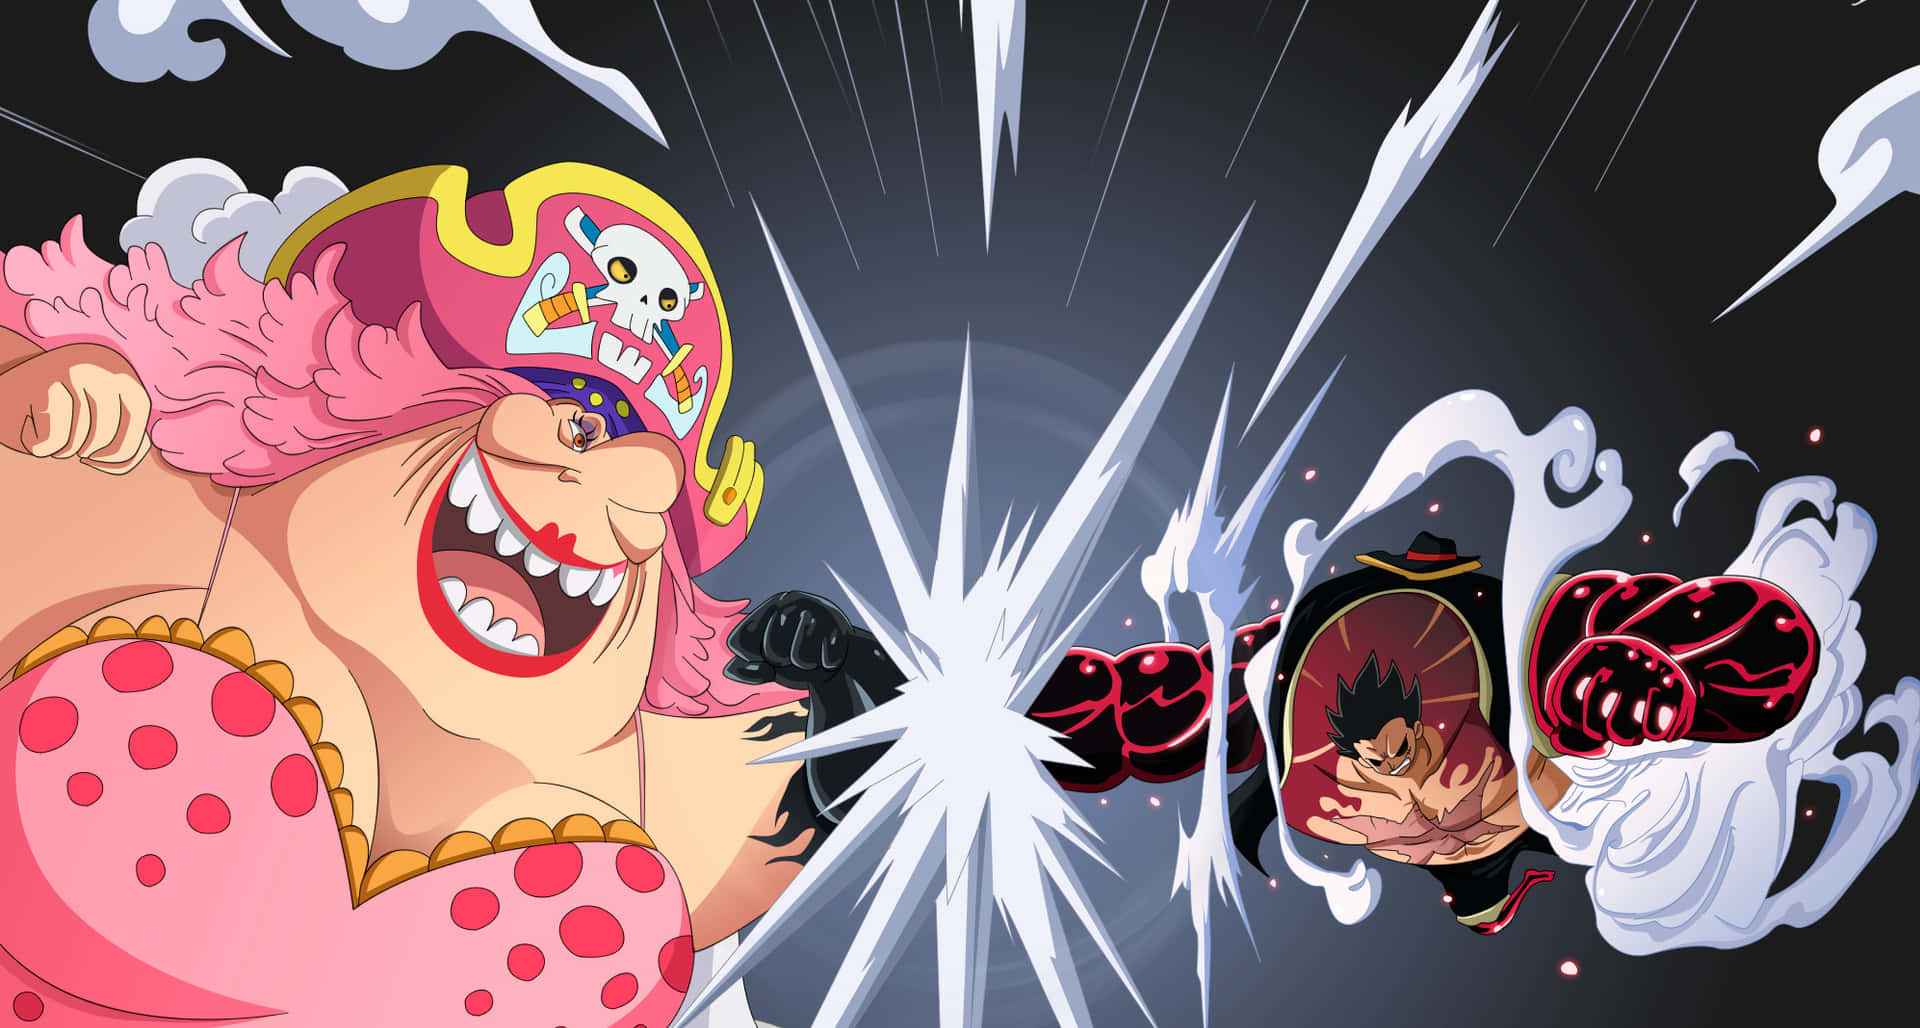 Charlotte Linlin, the fearsome pirate captain also known as Big Mom, smirks in all her glory in this One Piece illustration. Wallpaper